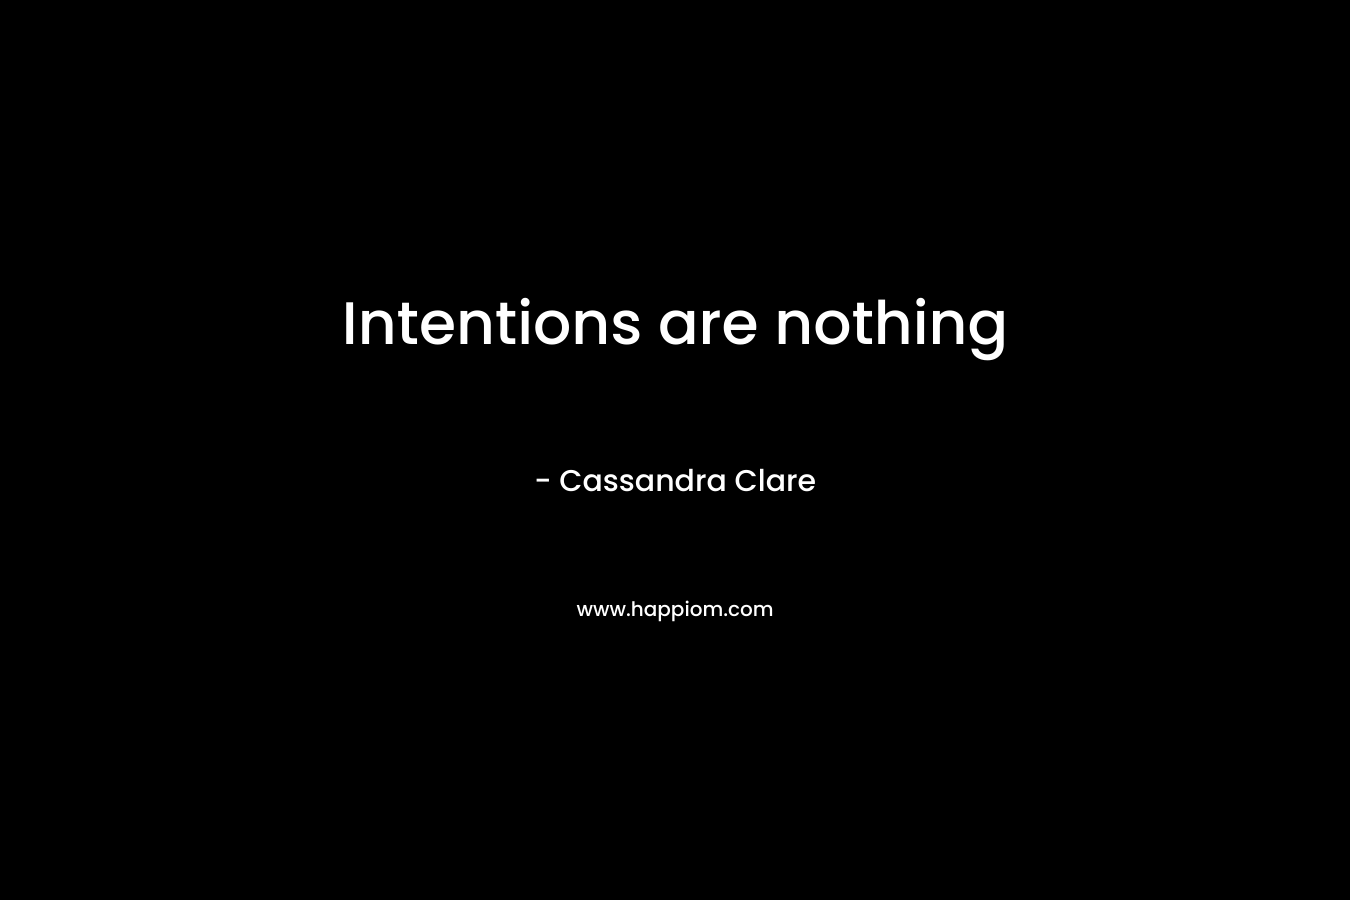 Intentions are nothing – Cassandra Clare